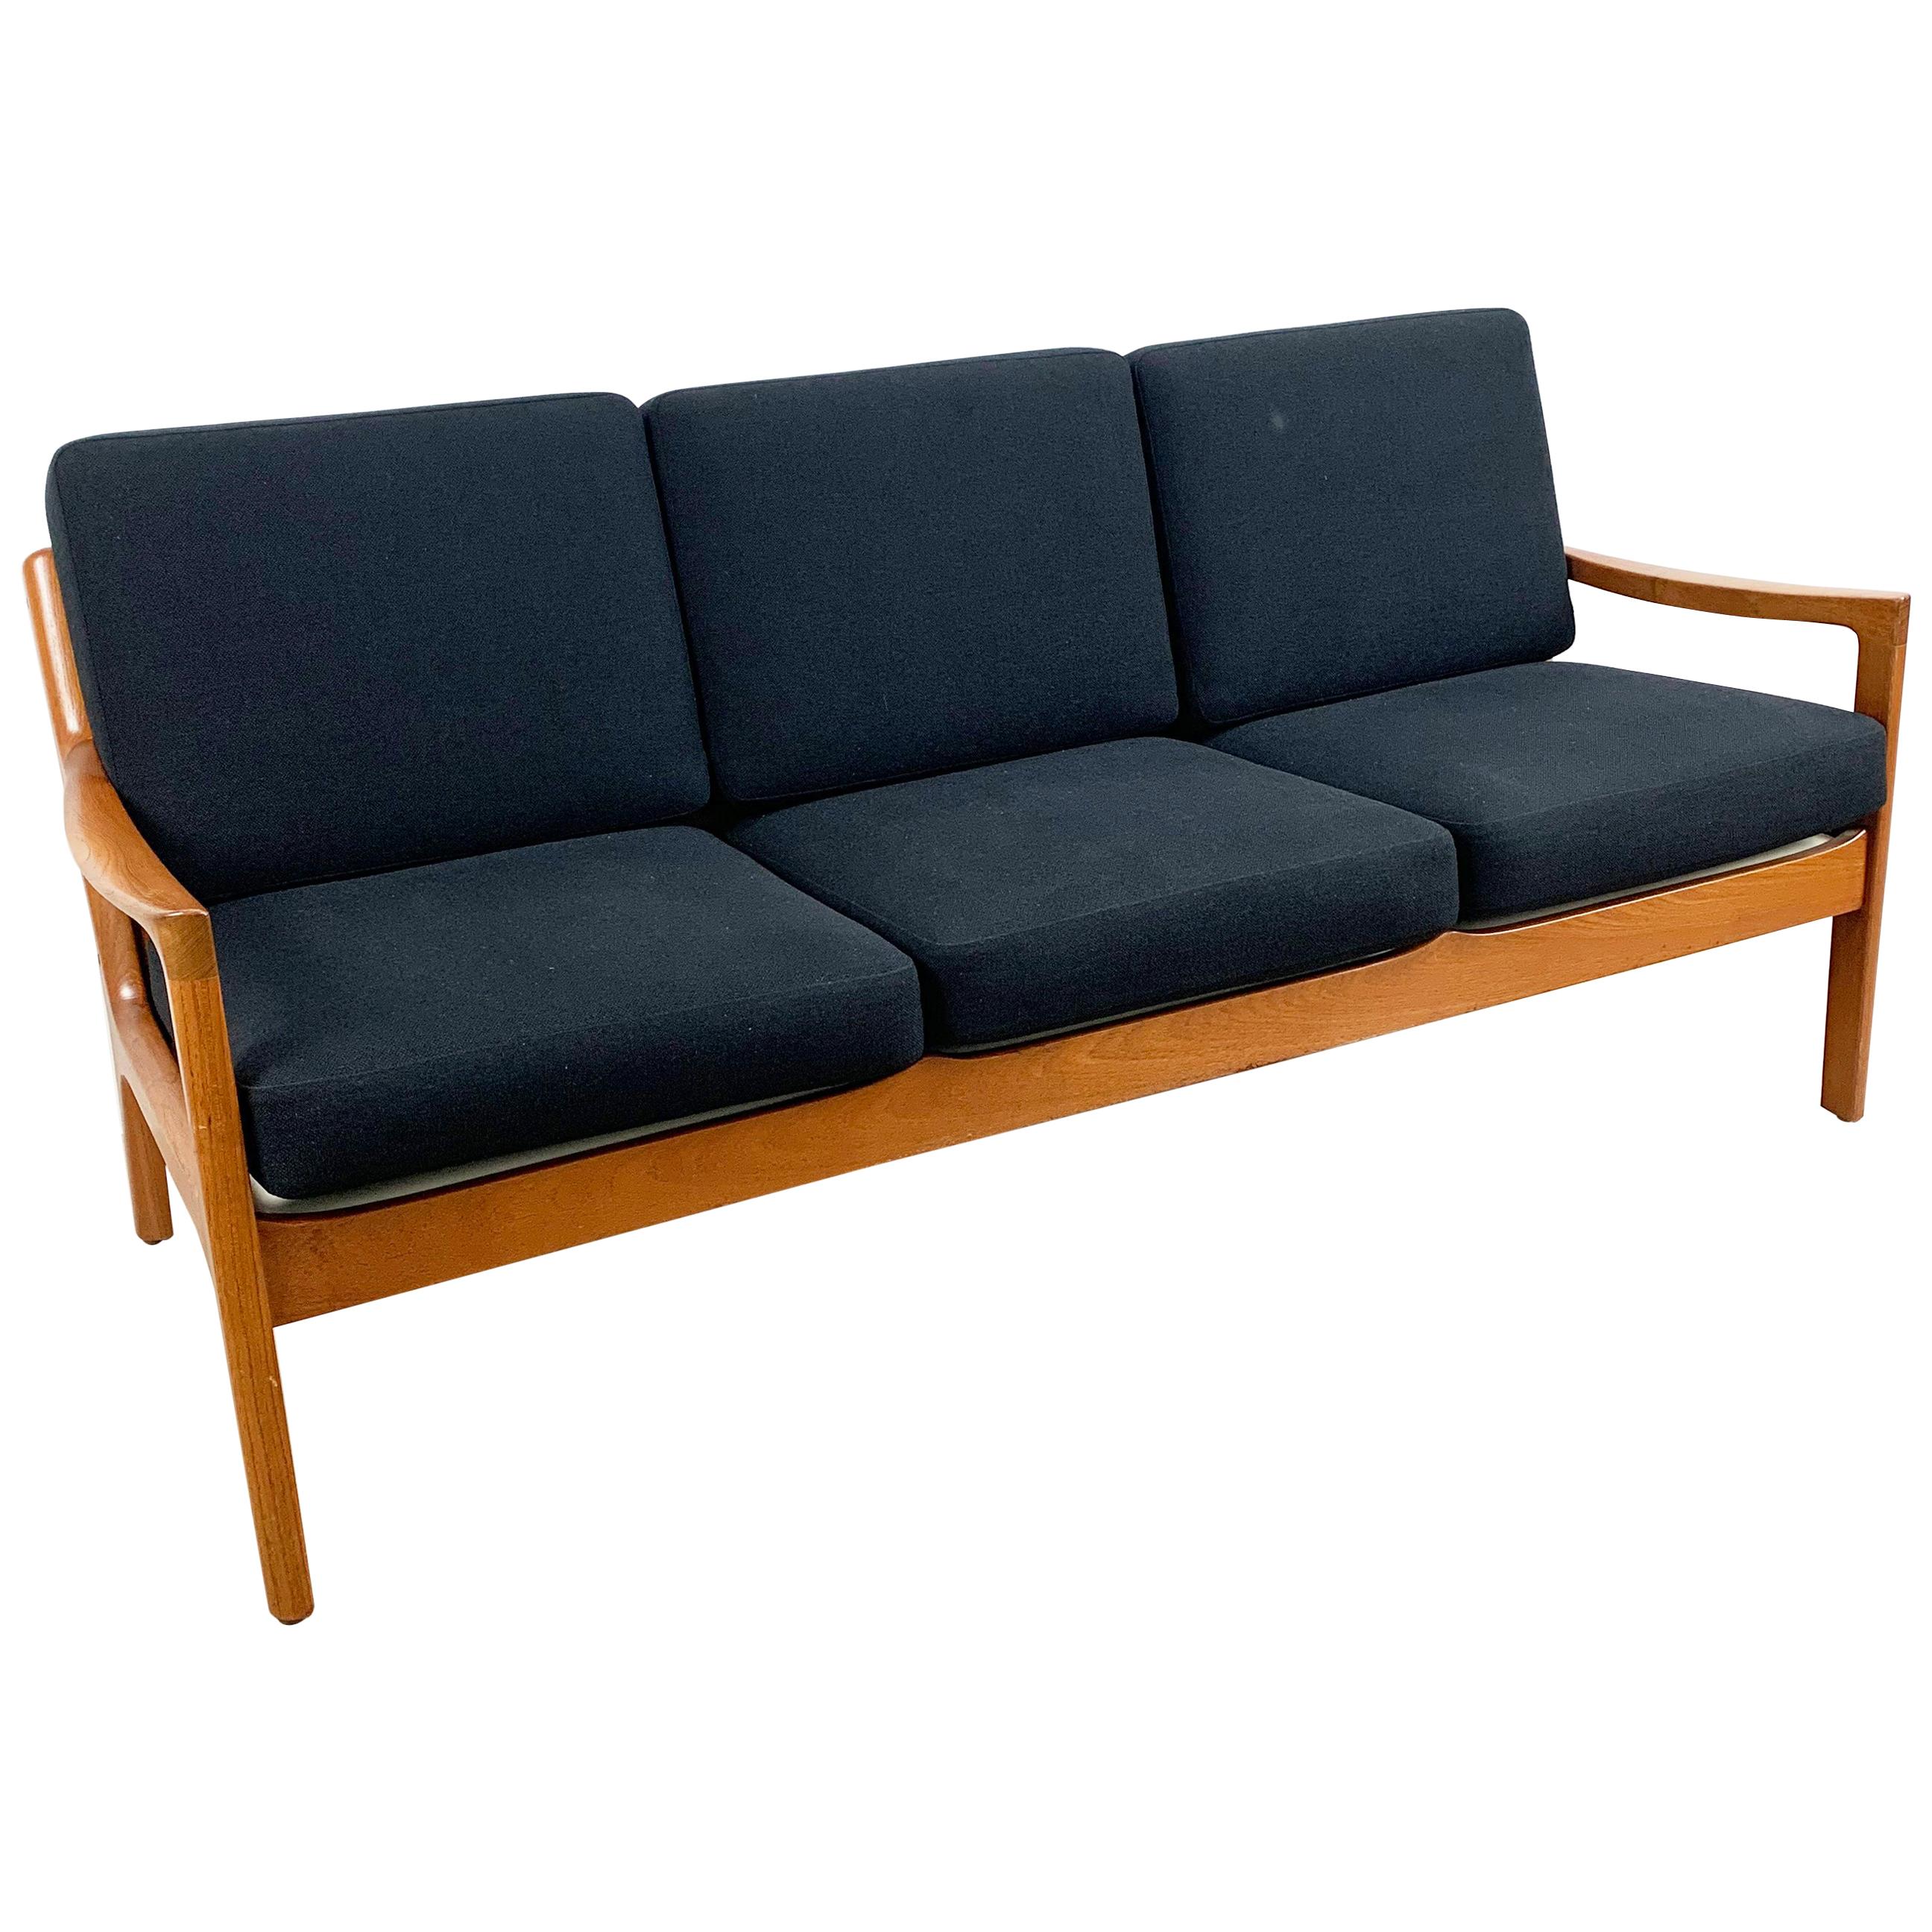 Ole Wanscher Senator Sofa in Solid Teak from 1962, Newly Upholstered For Sale